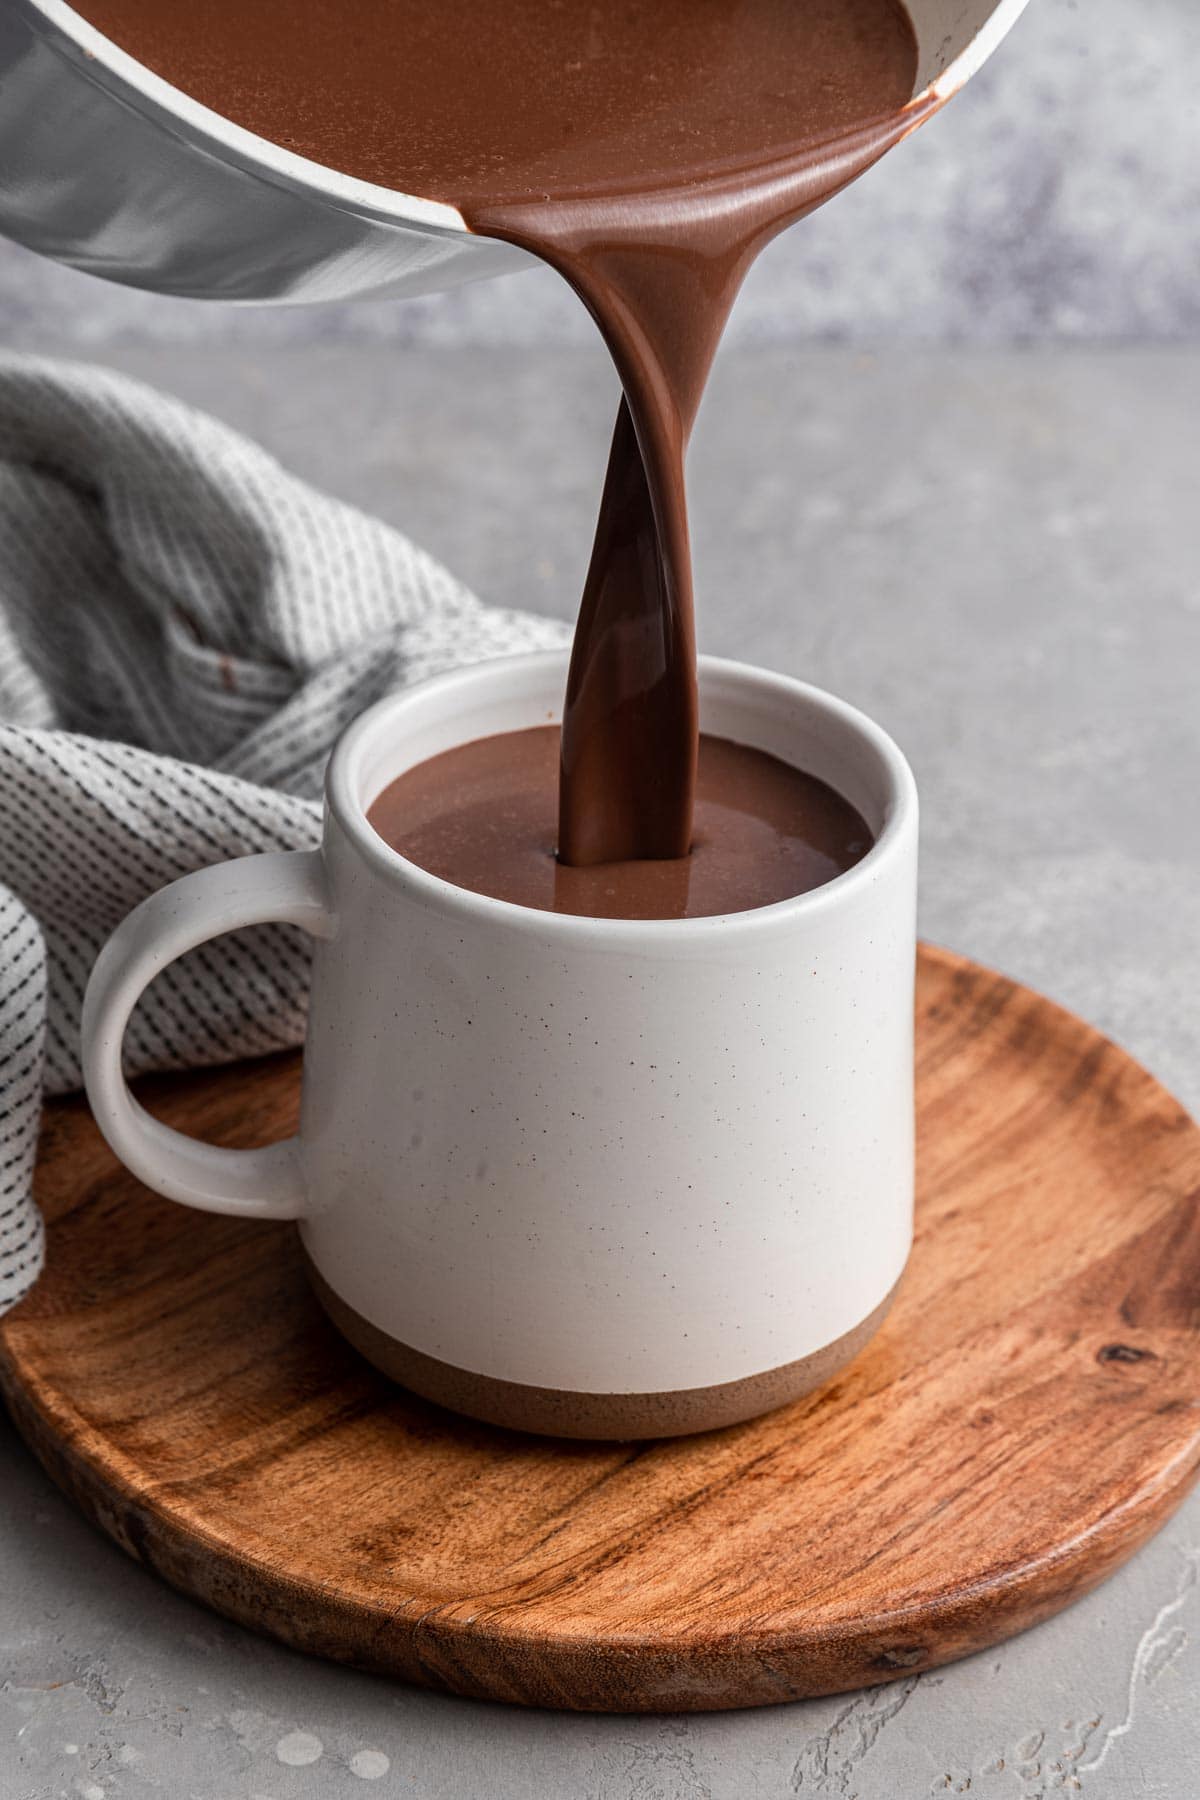 thick italian hot chocolate being poured into a white mug